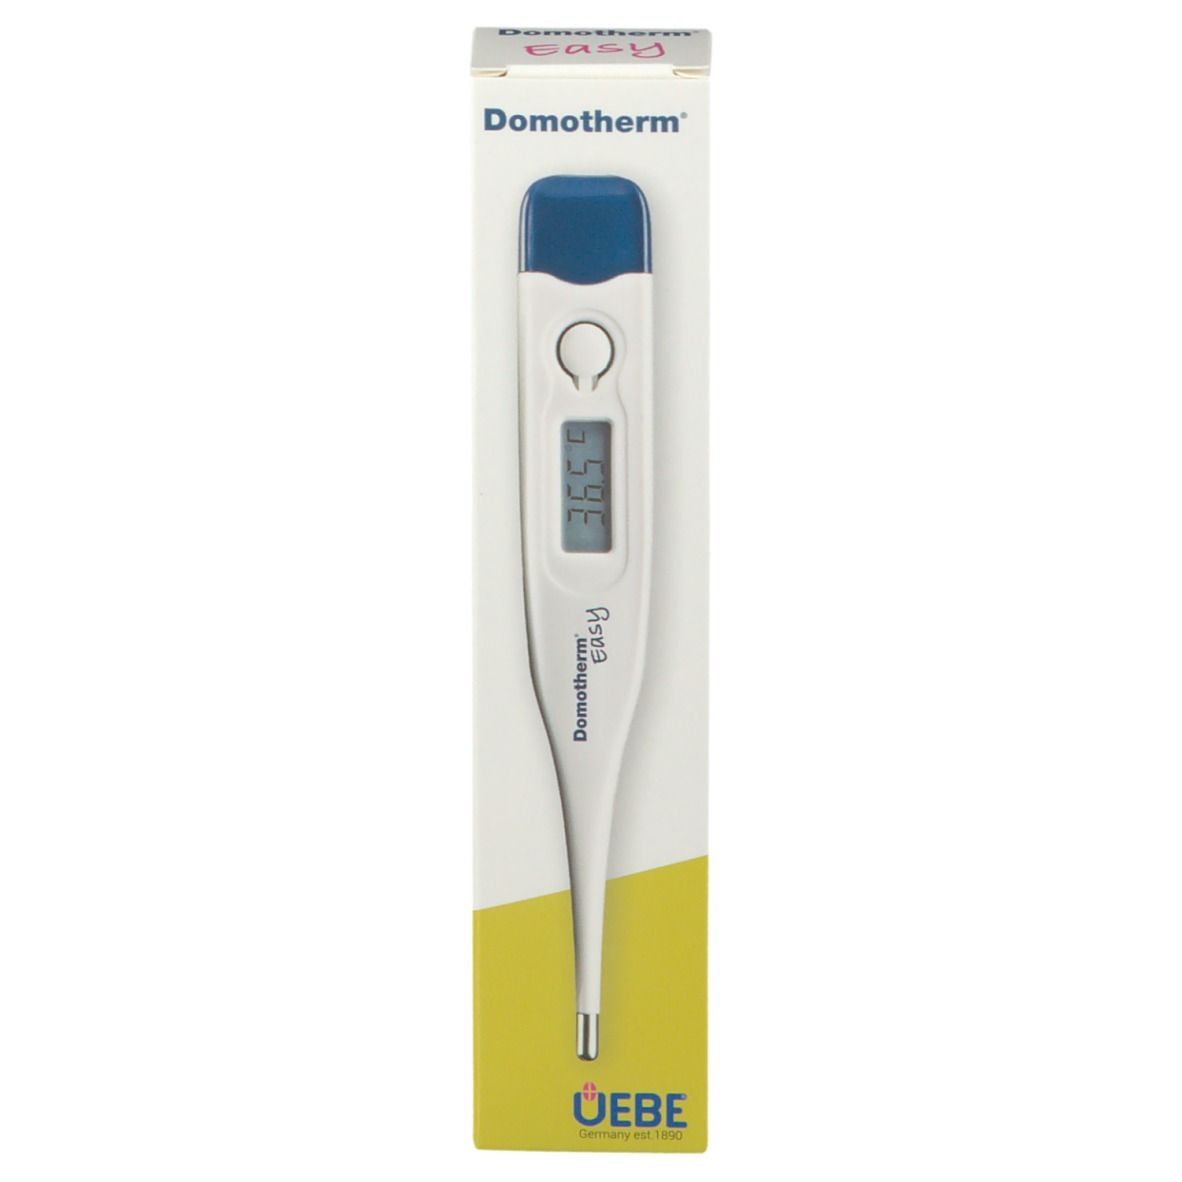 Domotherm® Easy digitales Fieberthermometer